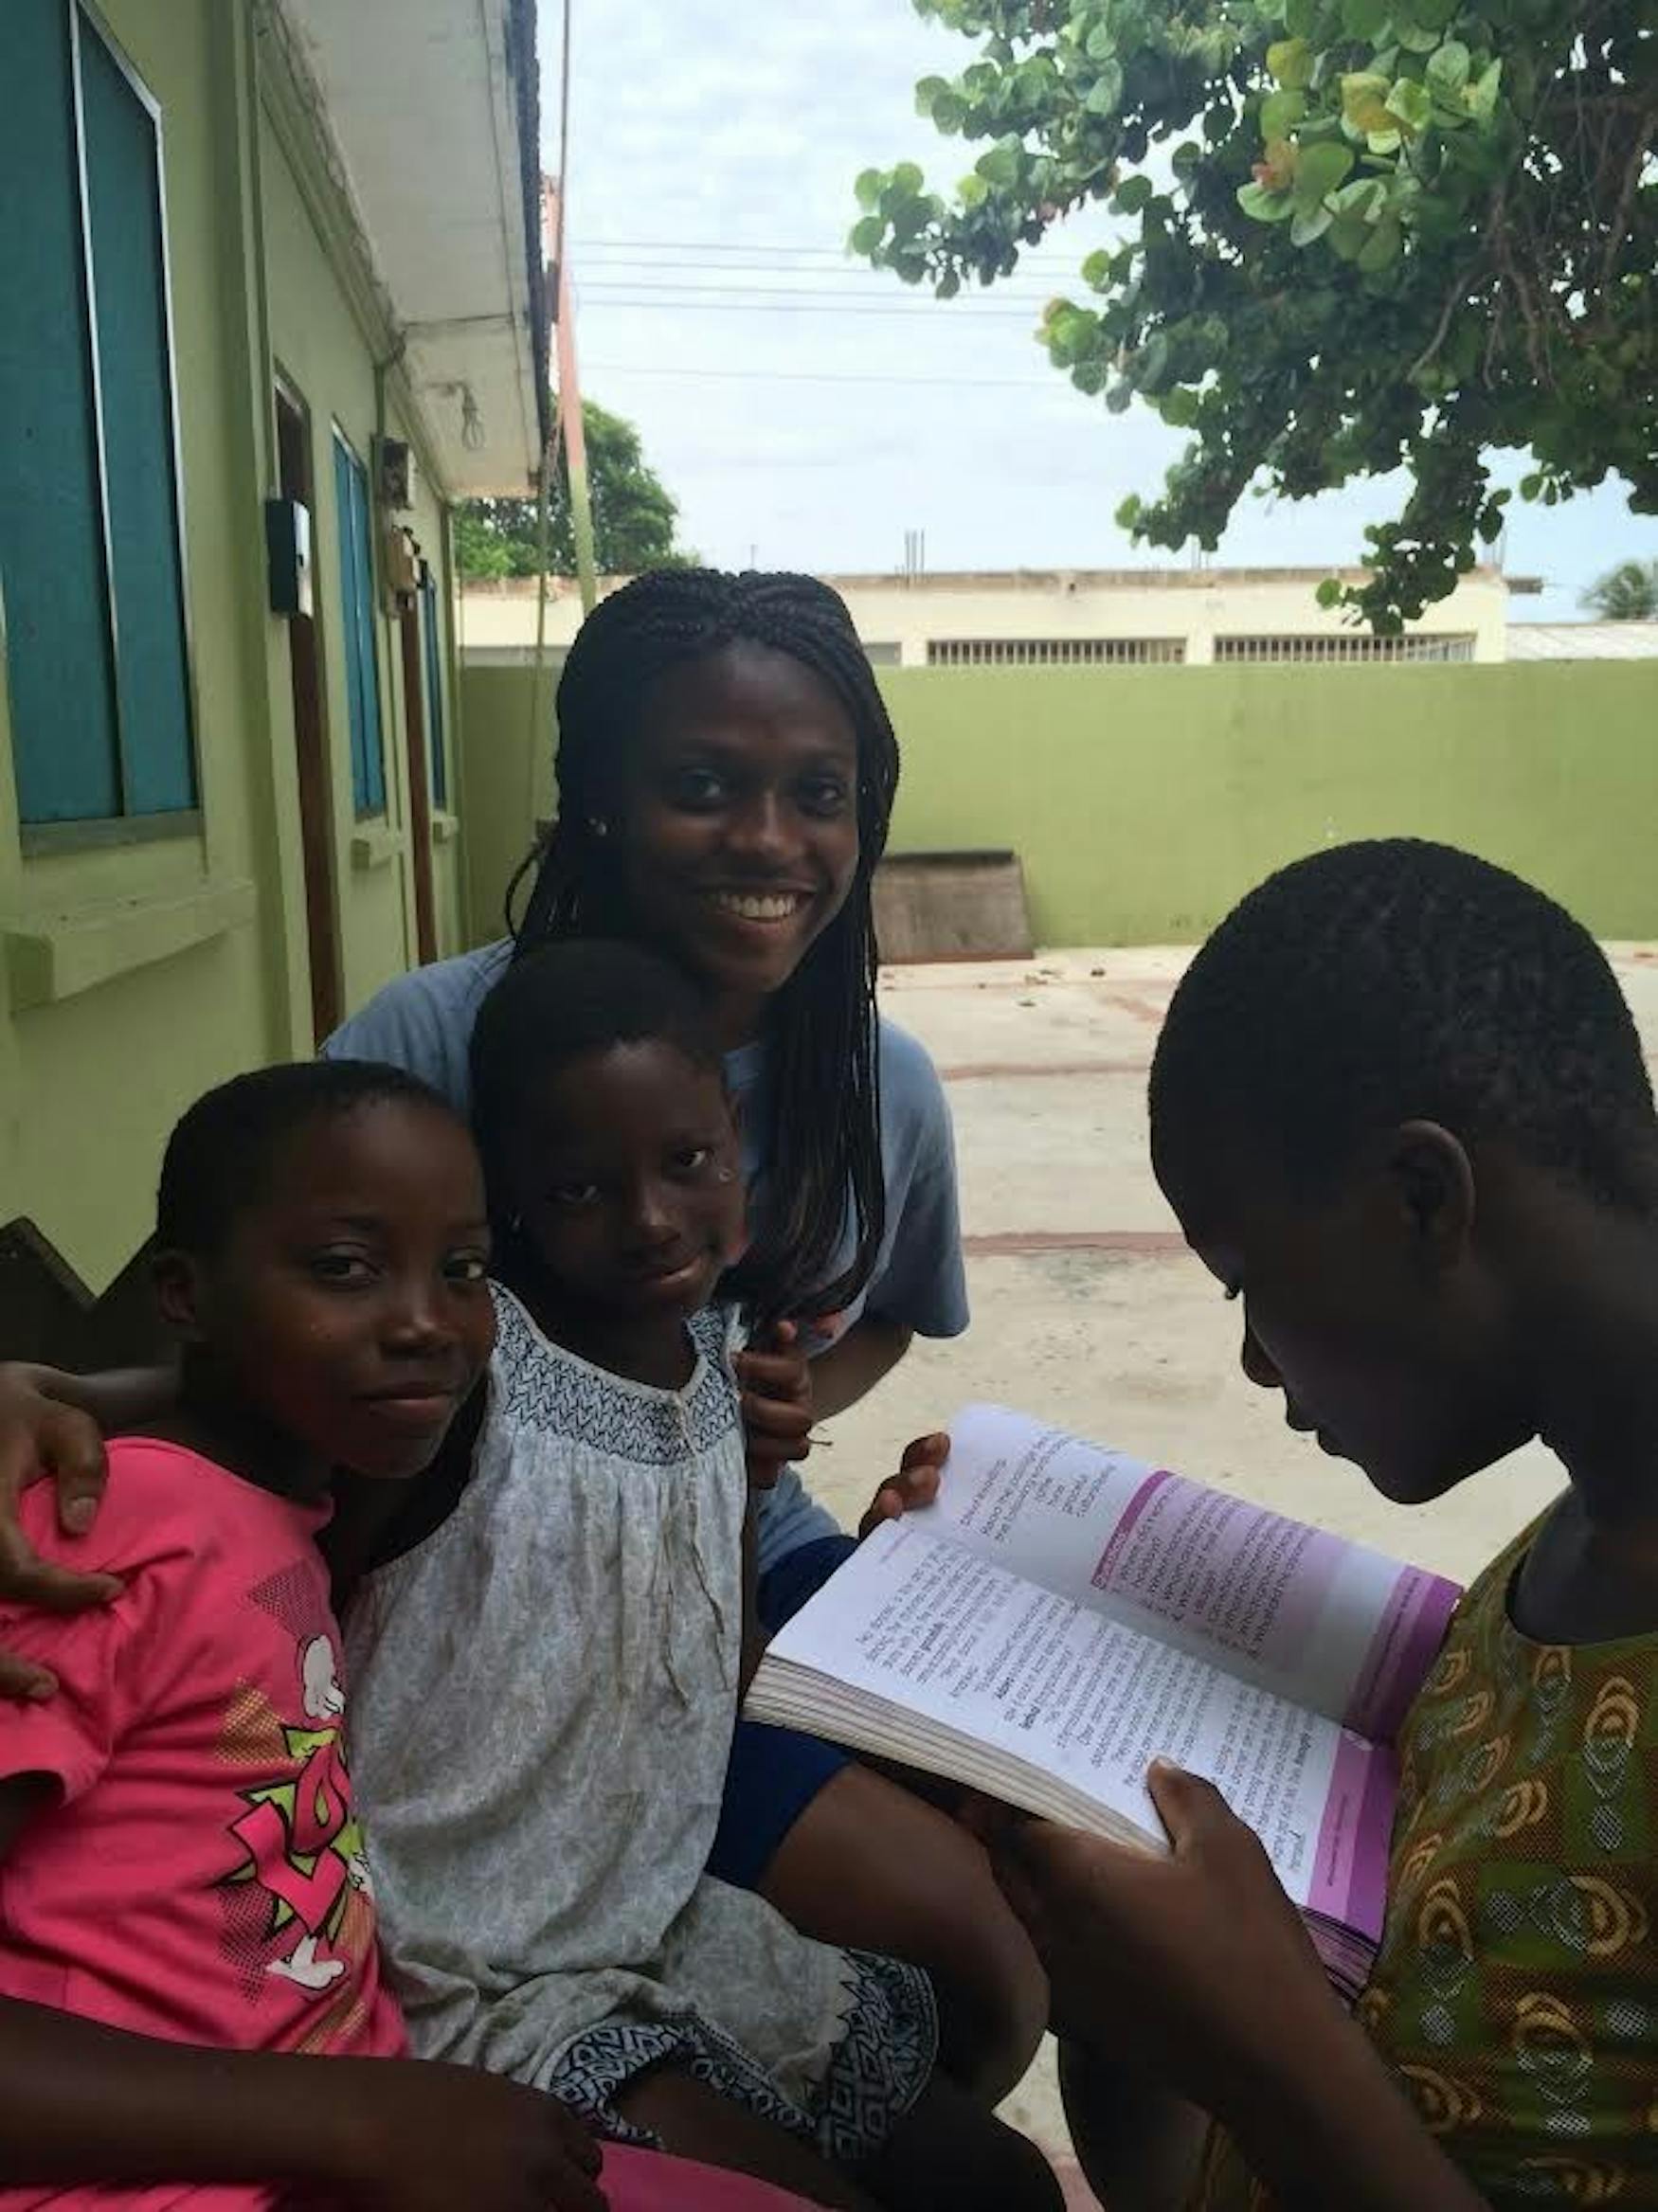 HELPING HANDS: Ngobitak Ndiwane '16 (center) helps students with their homework on the compound where she spent the summer in Atorkor, Ghana.